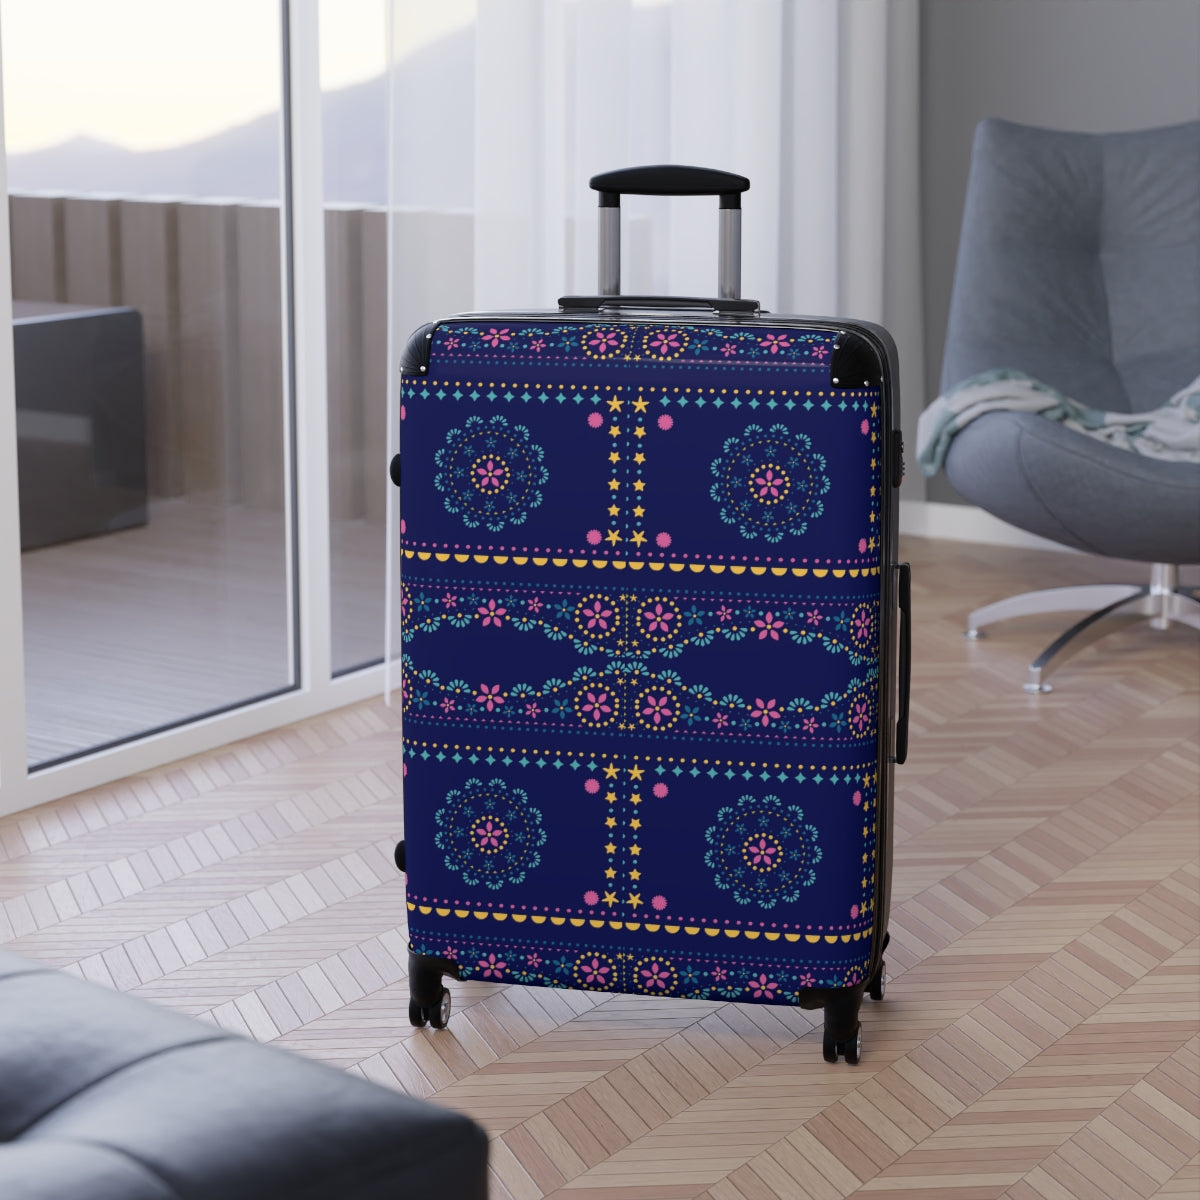 LUGGAGE WITH WHEELS, CARRY-ON SUITCASES, BOHO ART WORK PRINT, SPINNER 4 WHEELED